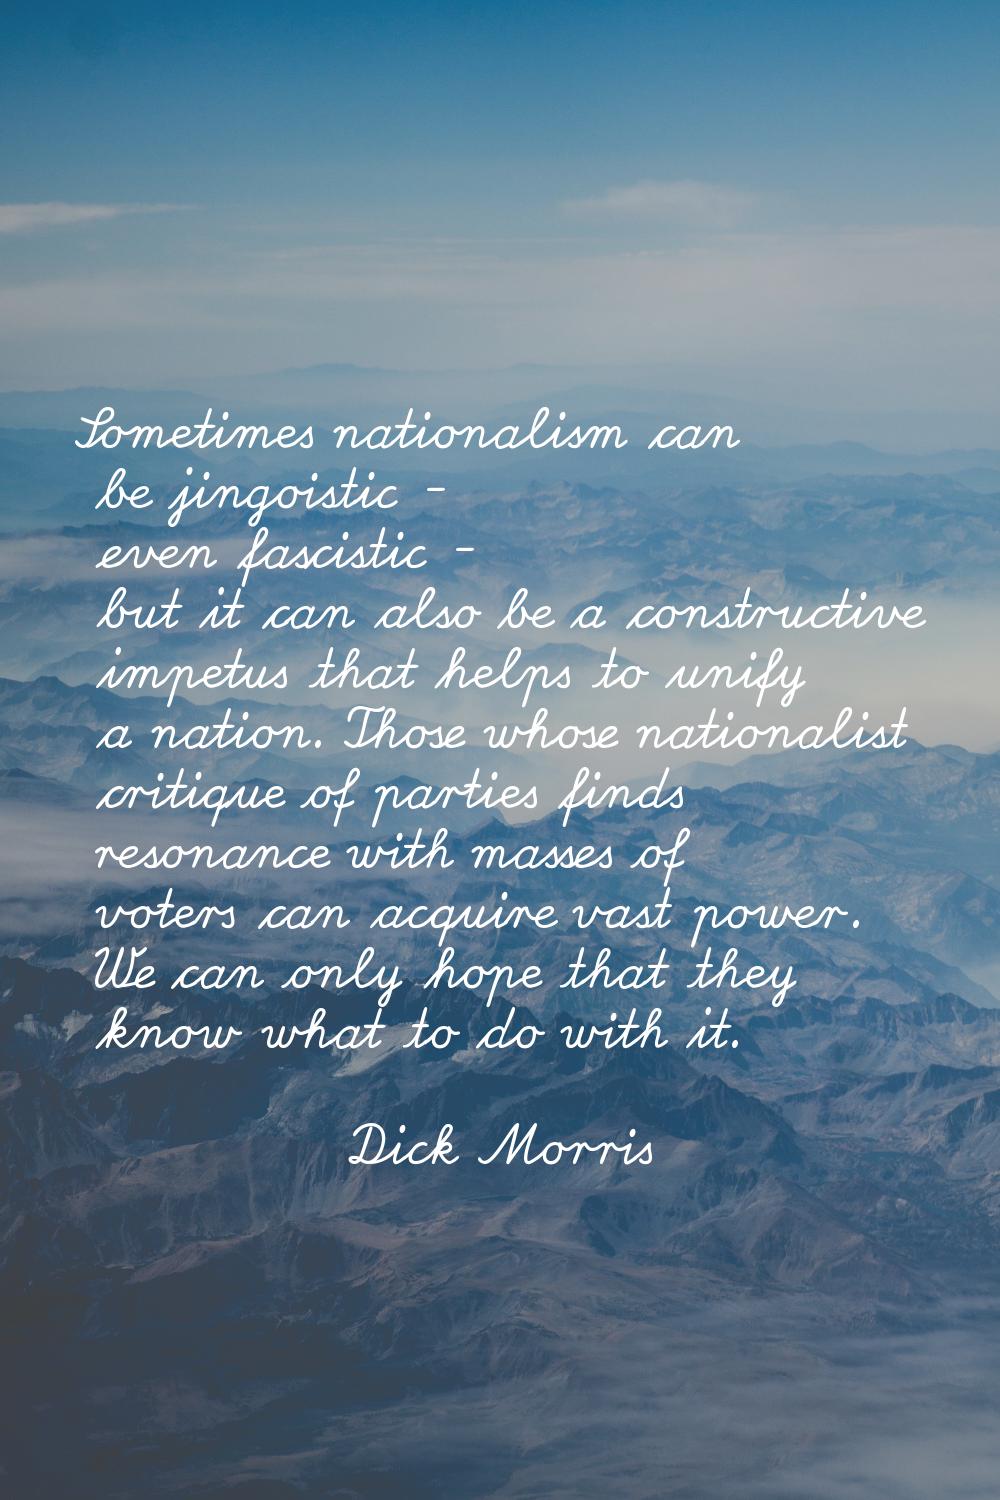 Sometimes nationalism can be jingoistic - even fascistic - but it can also be a constructive impetu